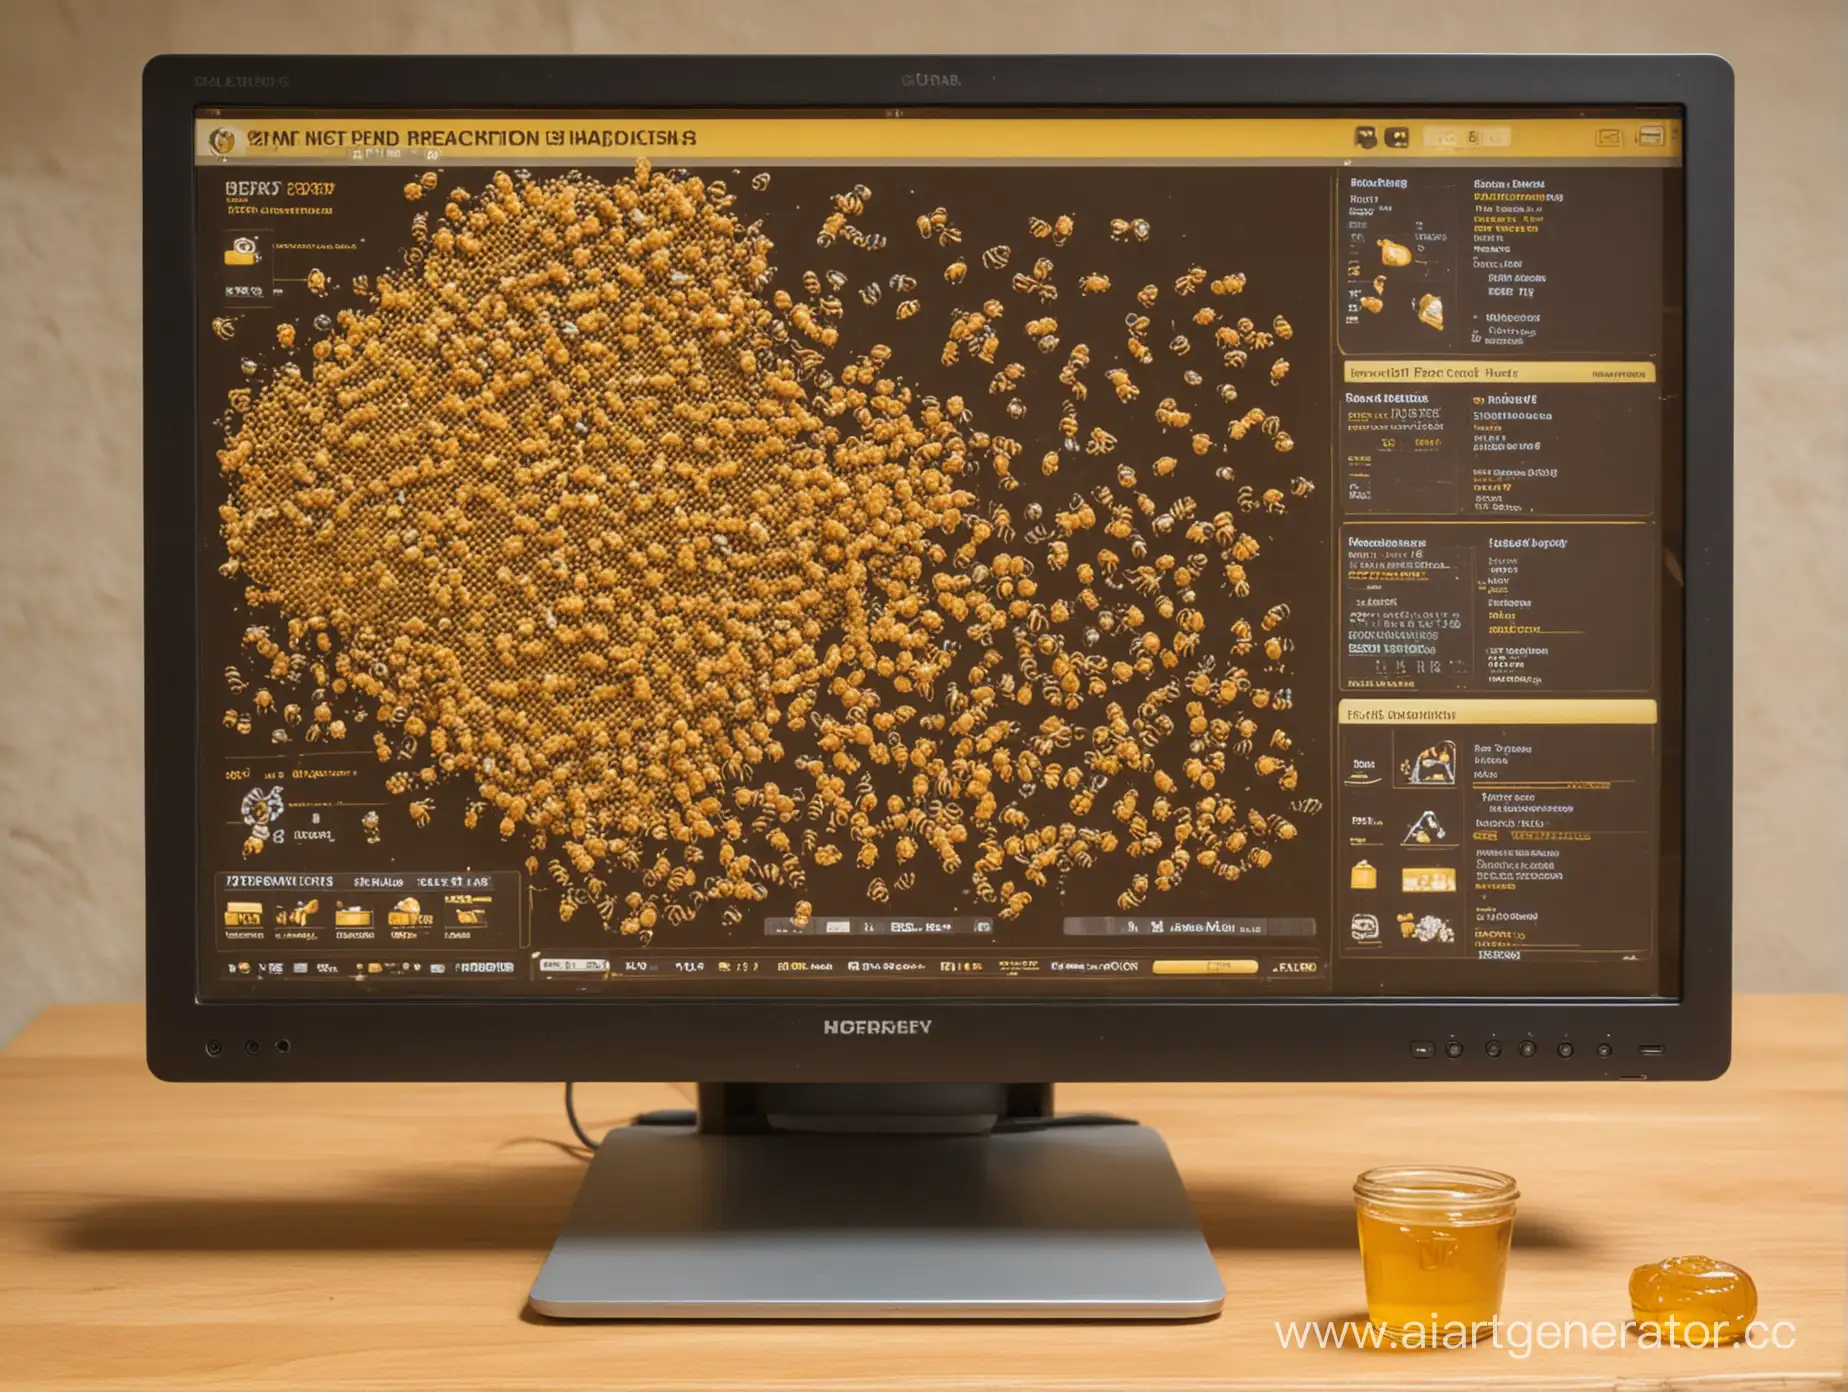 Honey-Production-Process-Illustrated-on-Computer-Monitor